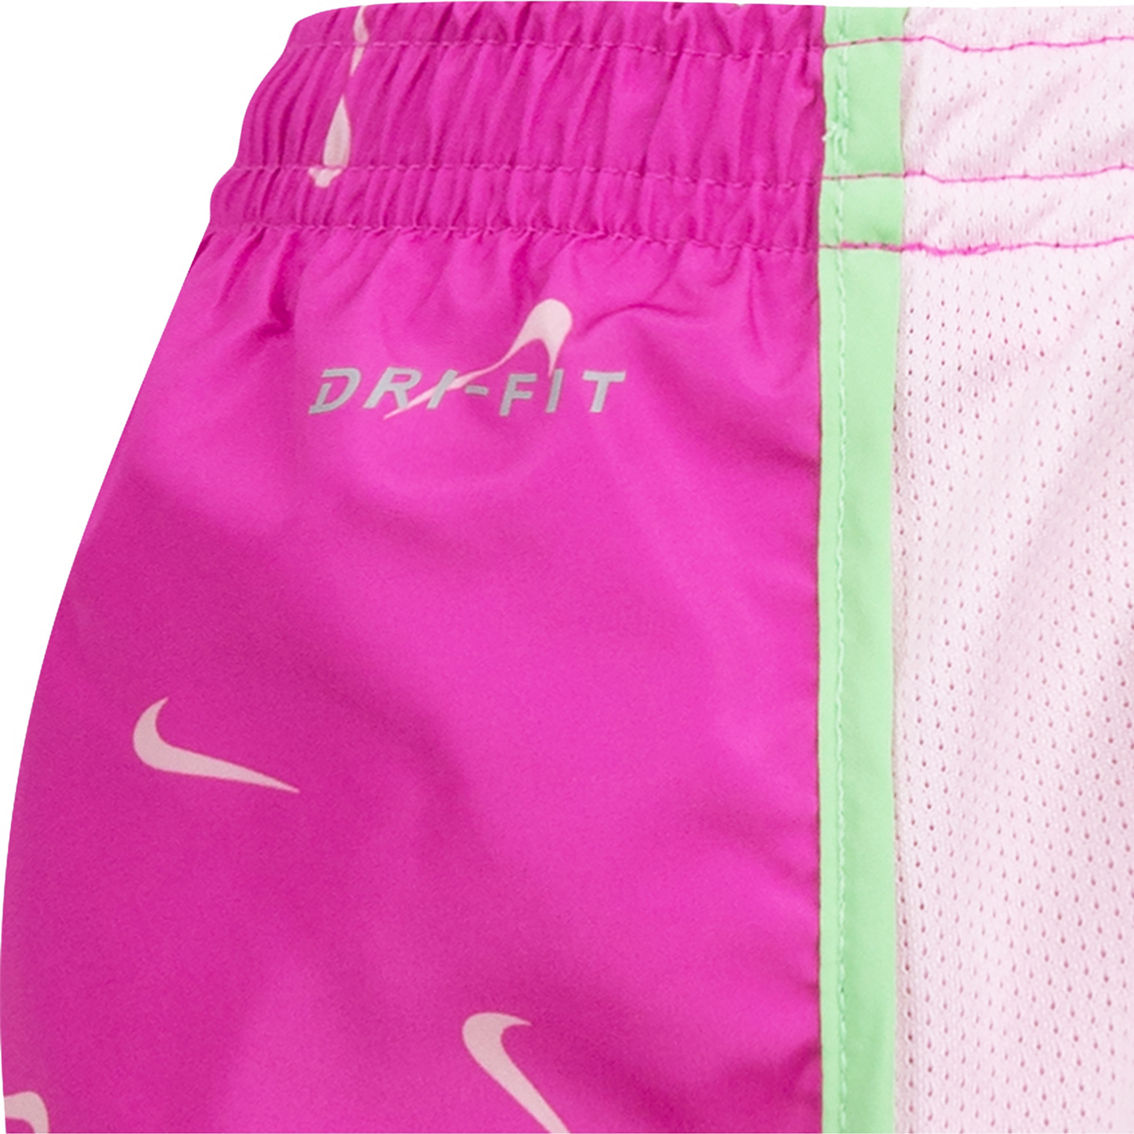 Nike Little Girls Dri-Fit Tee and Tempo Shorts 2 pc. Set - Image 7 of 8